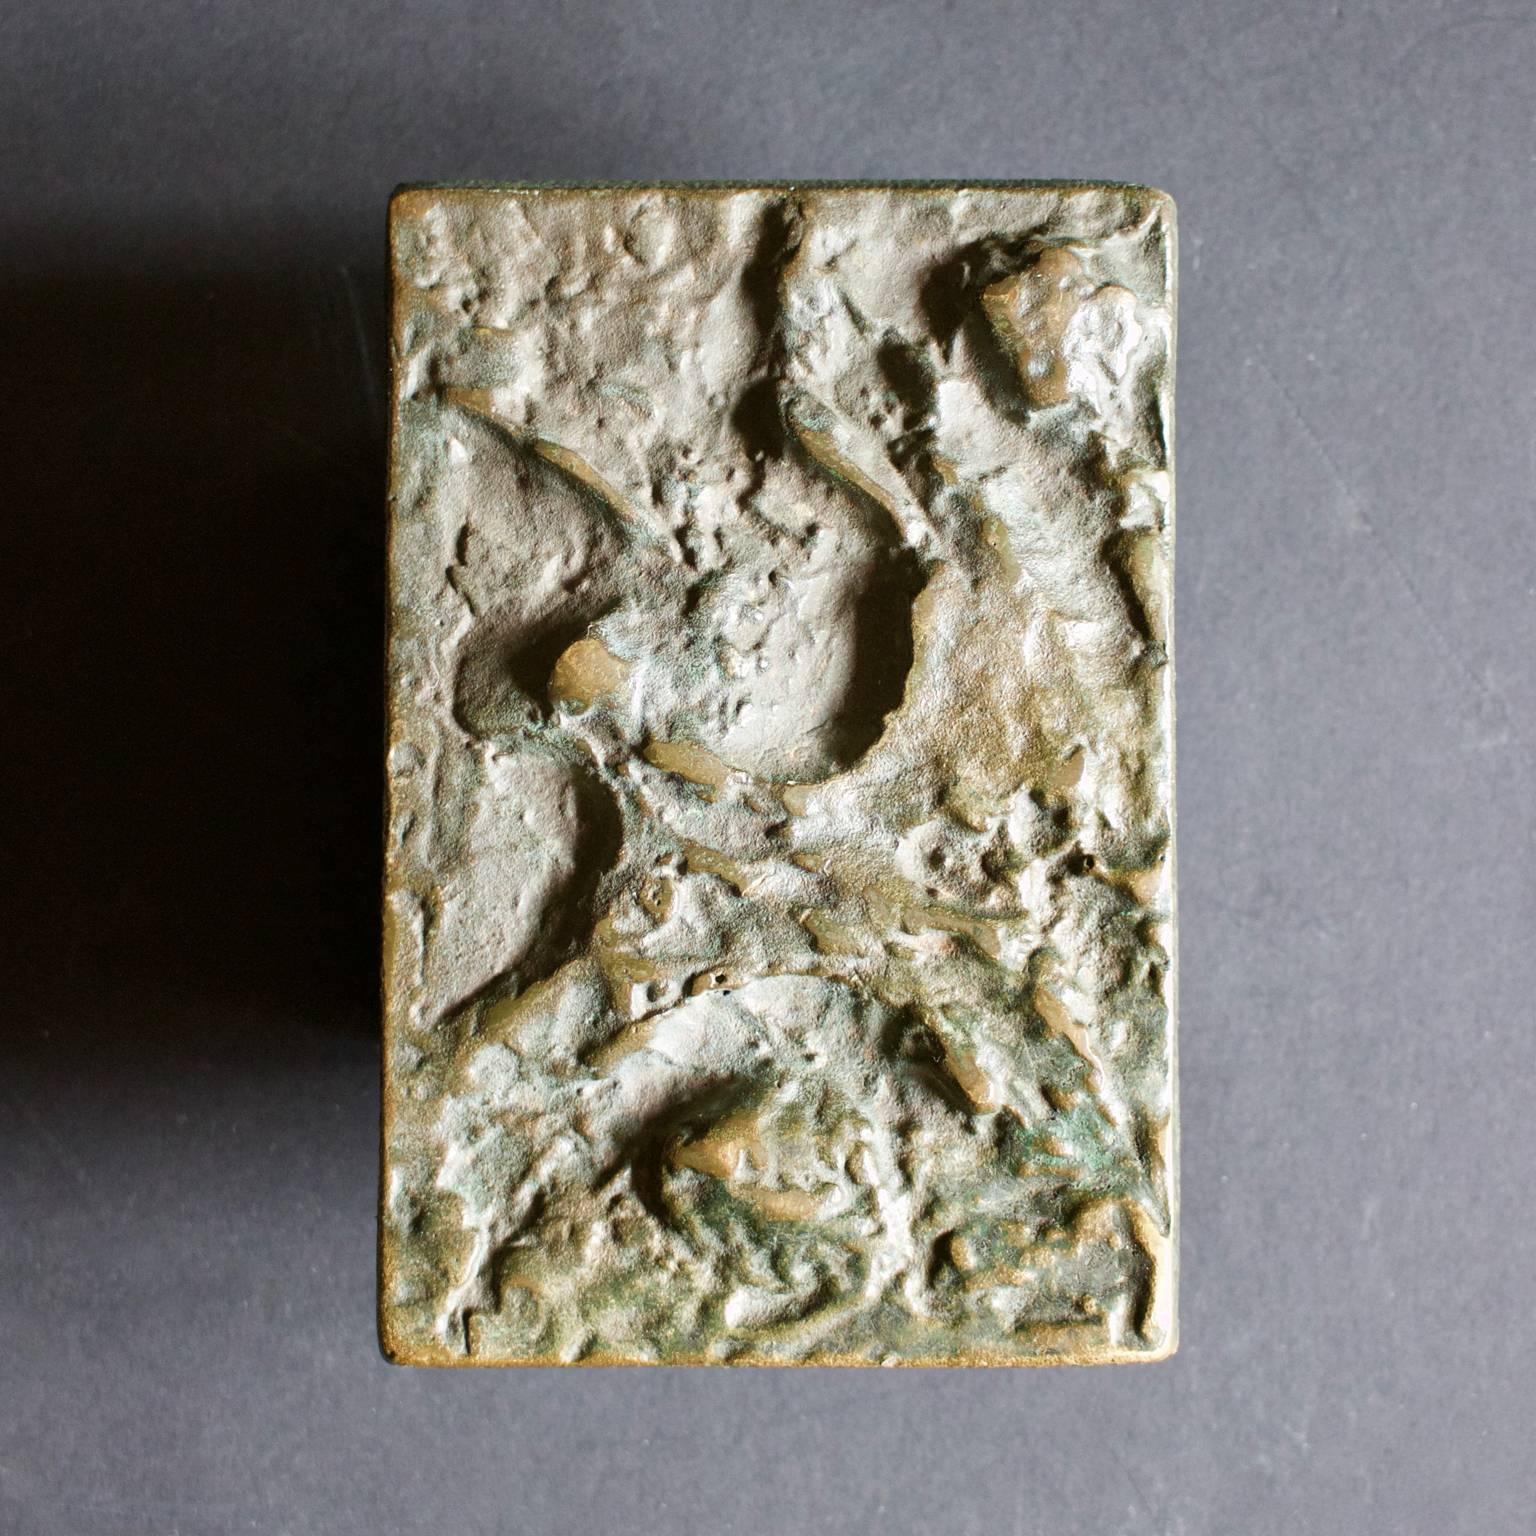 A single rectangular bronze door handle with abstract relief, evoking the textures and patterns of natural rock. Europe, mid-20th century.

The handle is in good original condition, and there are minor signs of old paint on the reverse which cannot